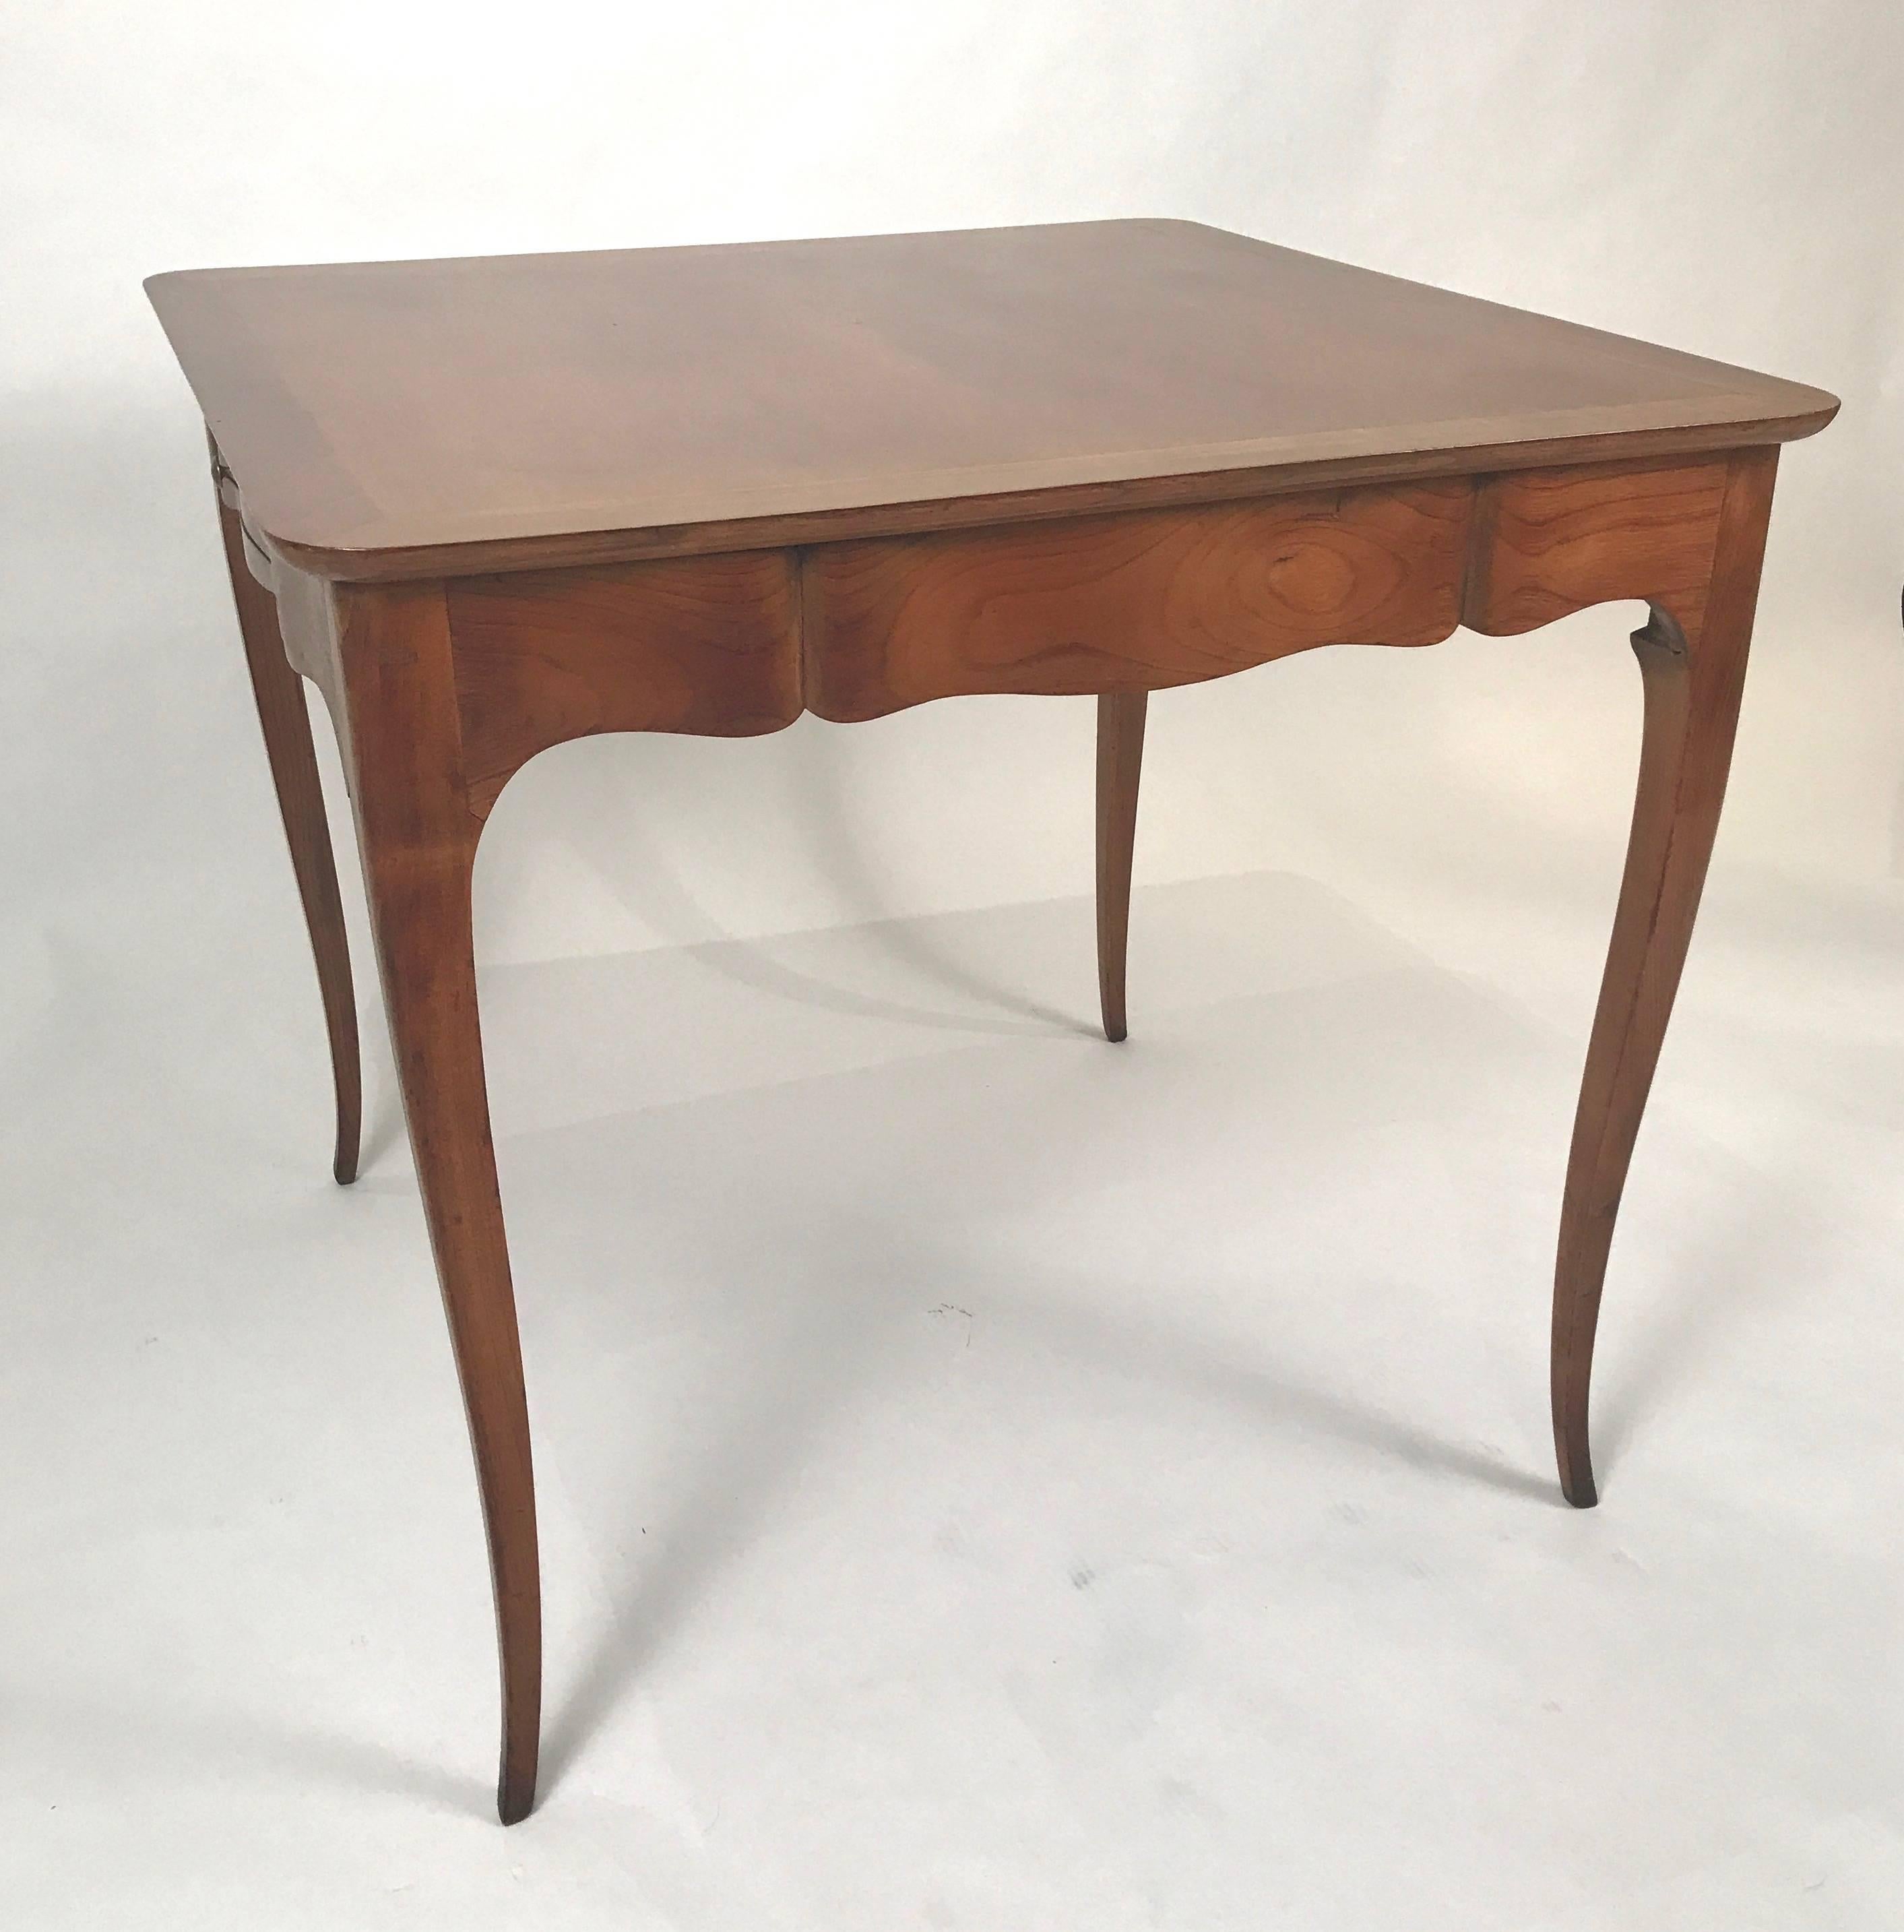 20th Century Two-Sided 1940s Fruitwood Carlhian Paris Decorative French Writing or Game Table